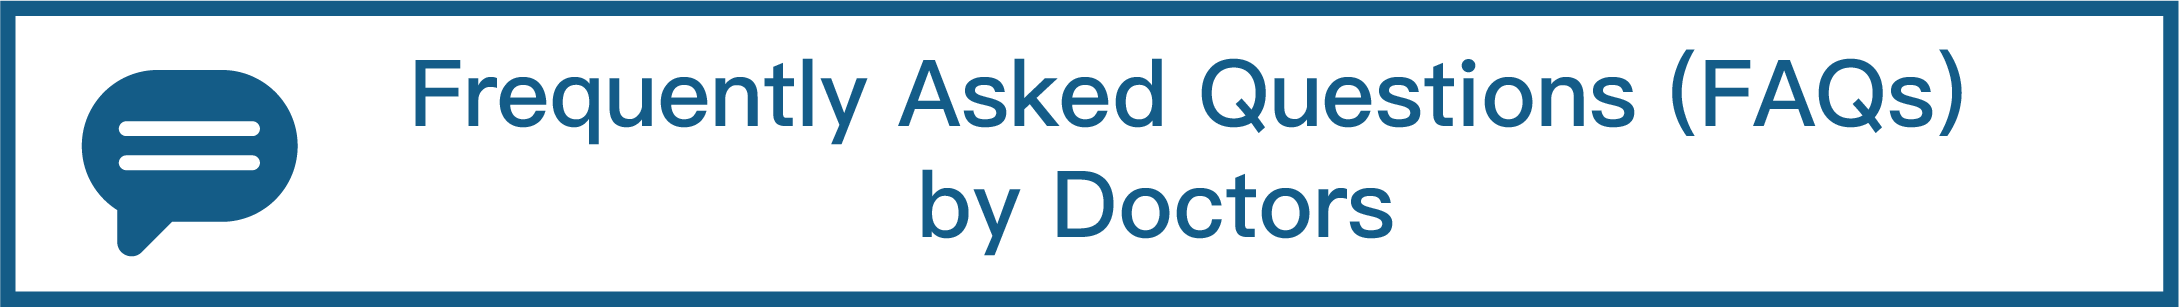 Frequently Asked Questions (FAQs) by Doctors